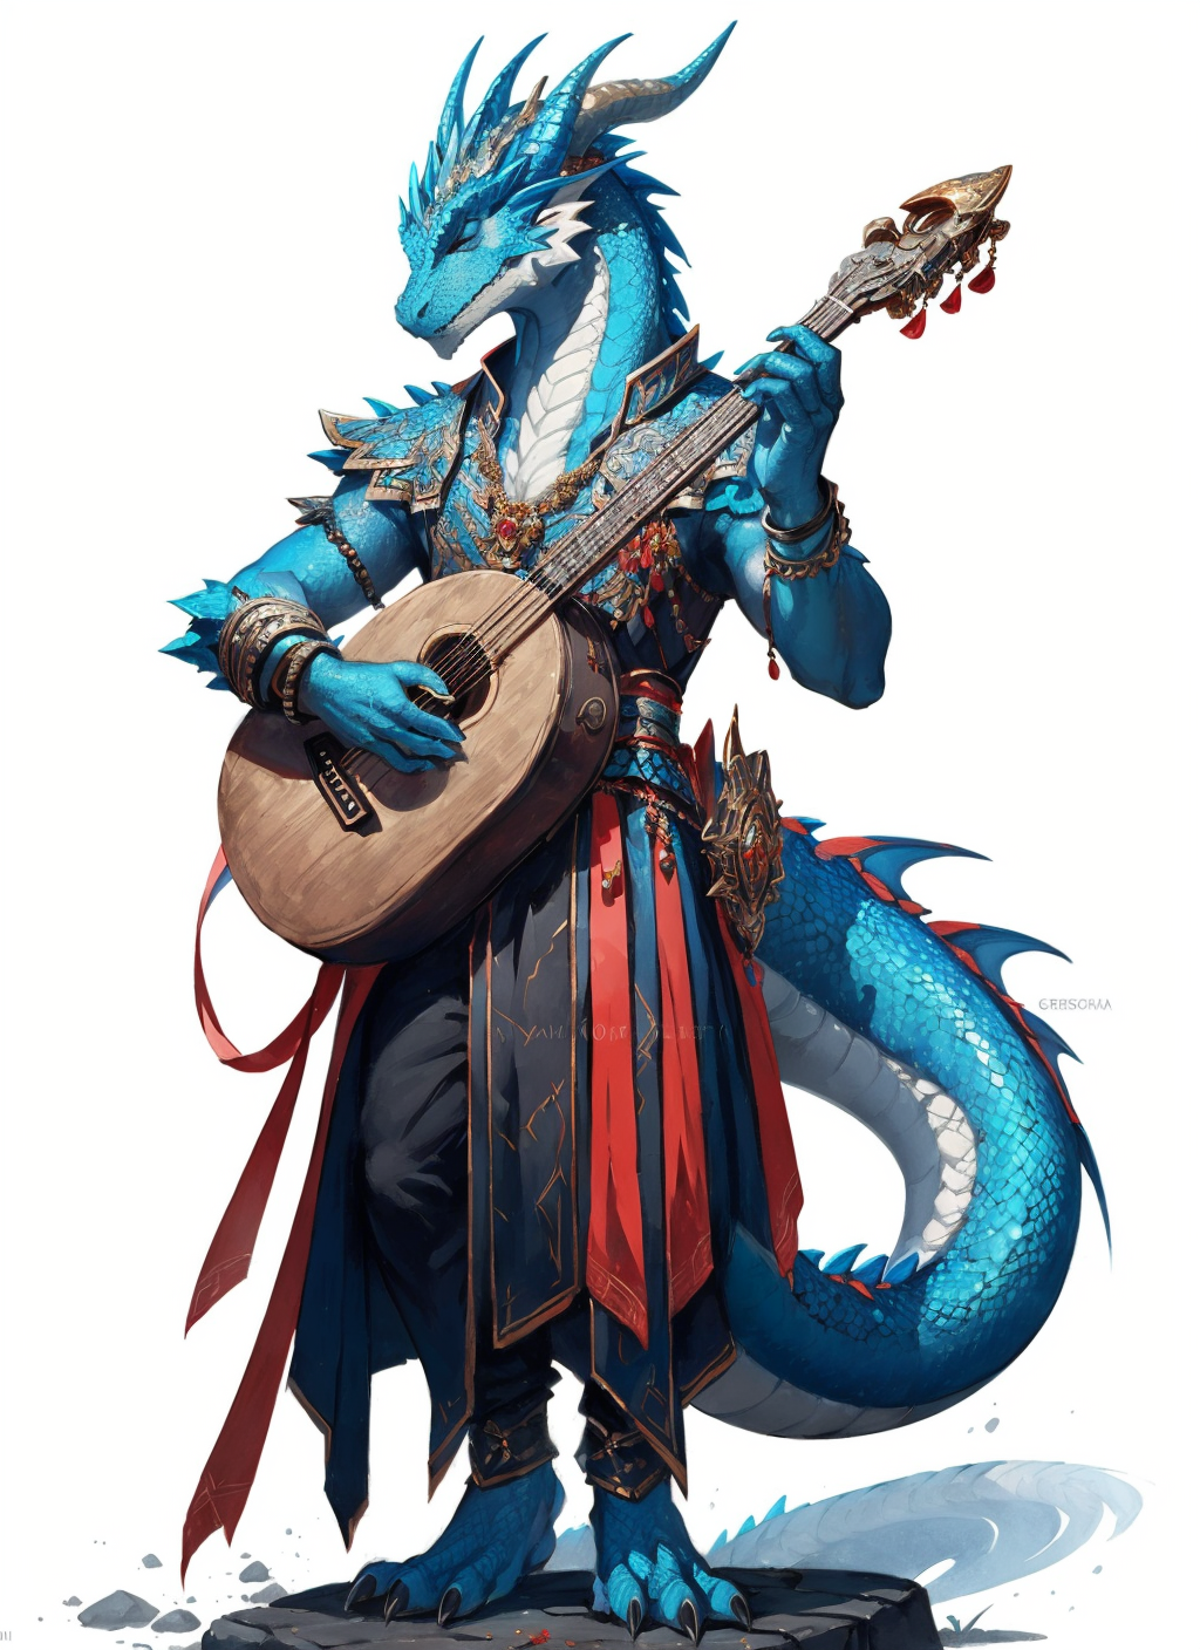 Blue Dragon Character Playing Guitar in a Fantasy Art Illustration